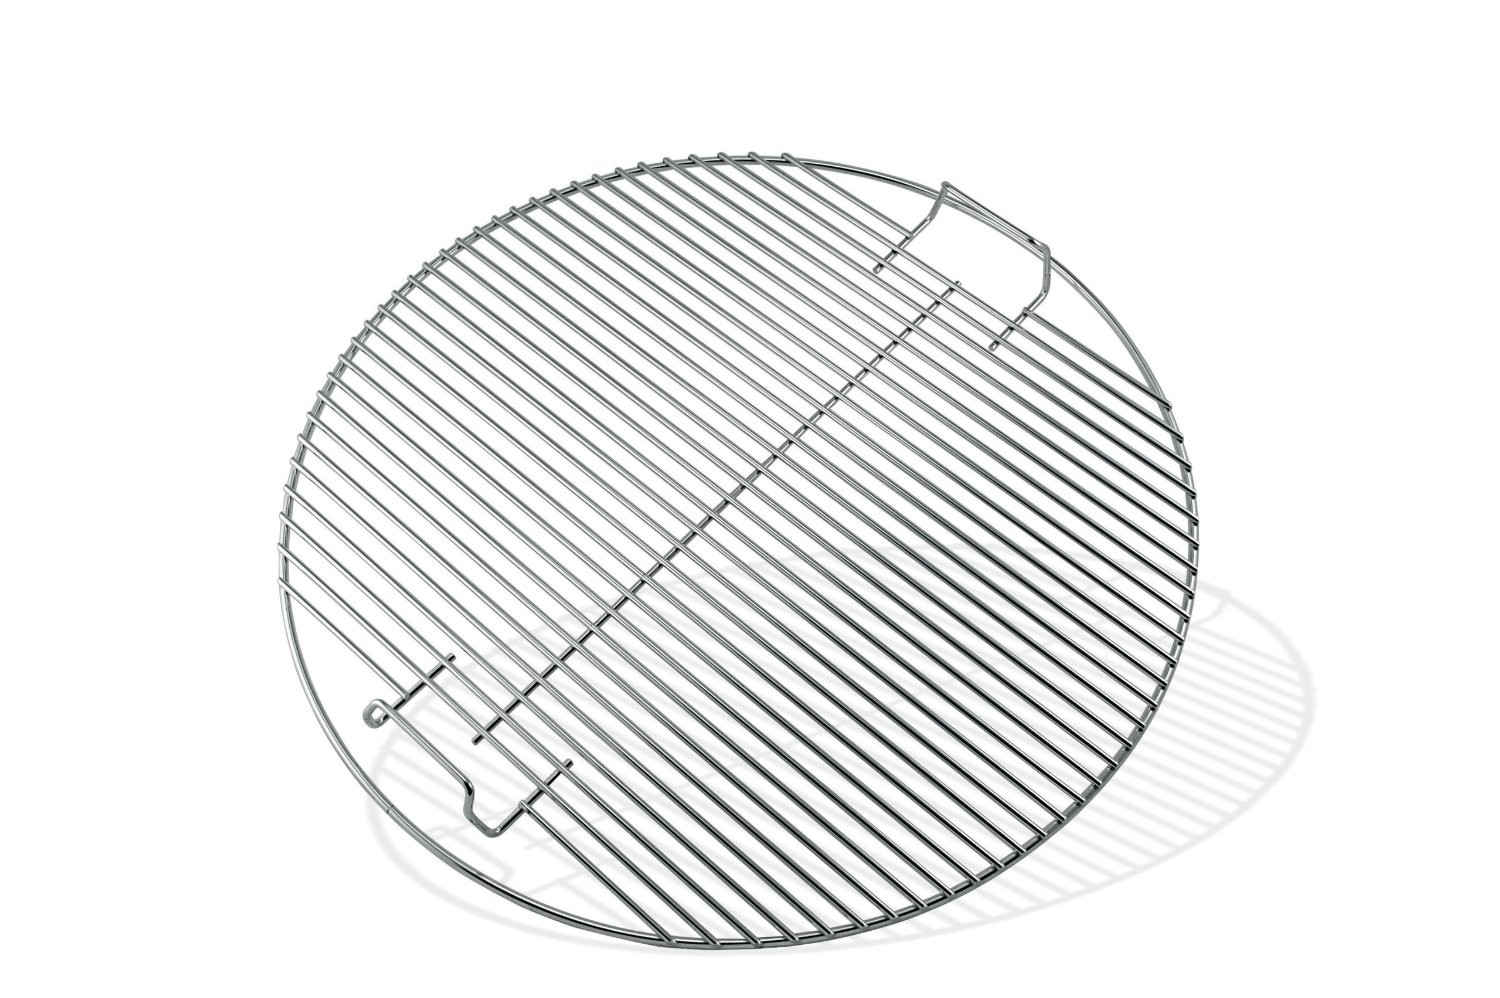 Weber 47cm Chrome Plated Cooking Grate